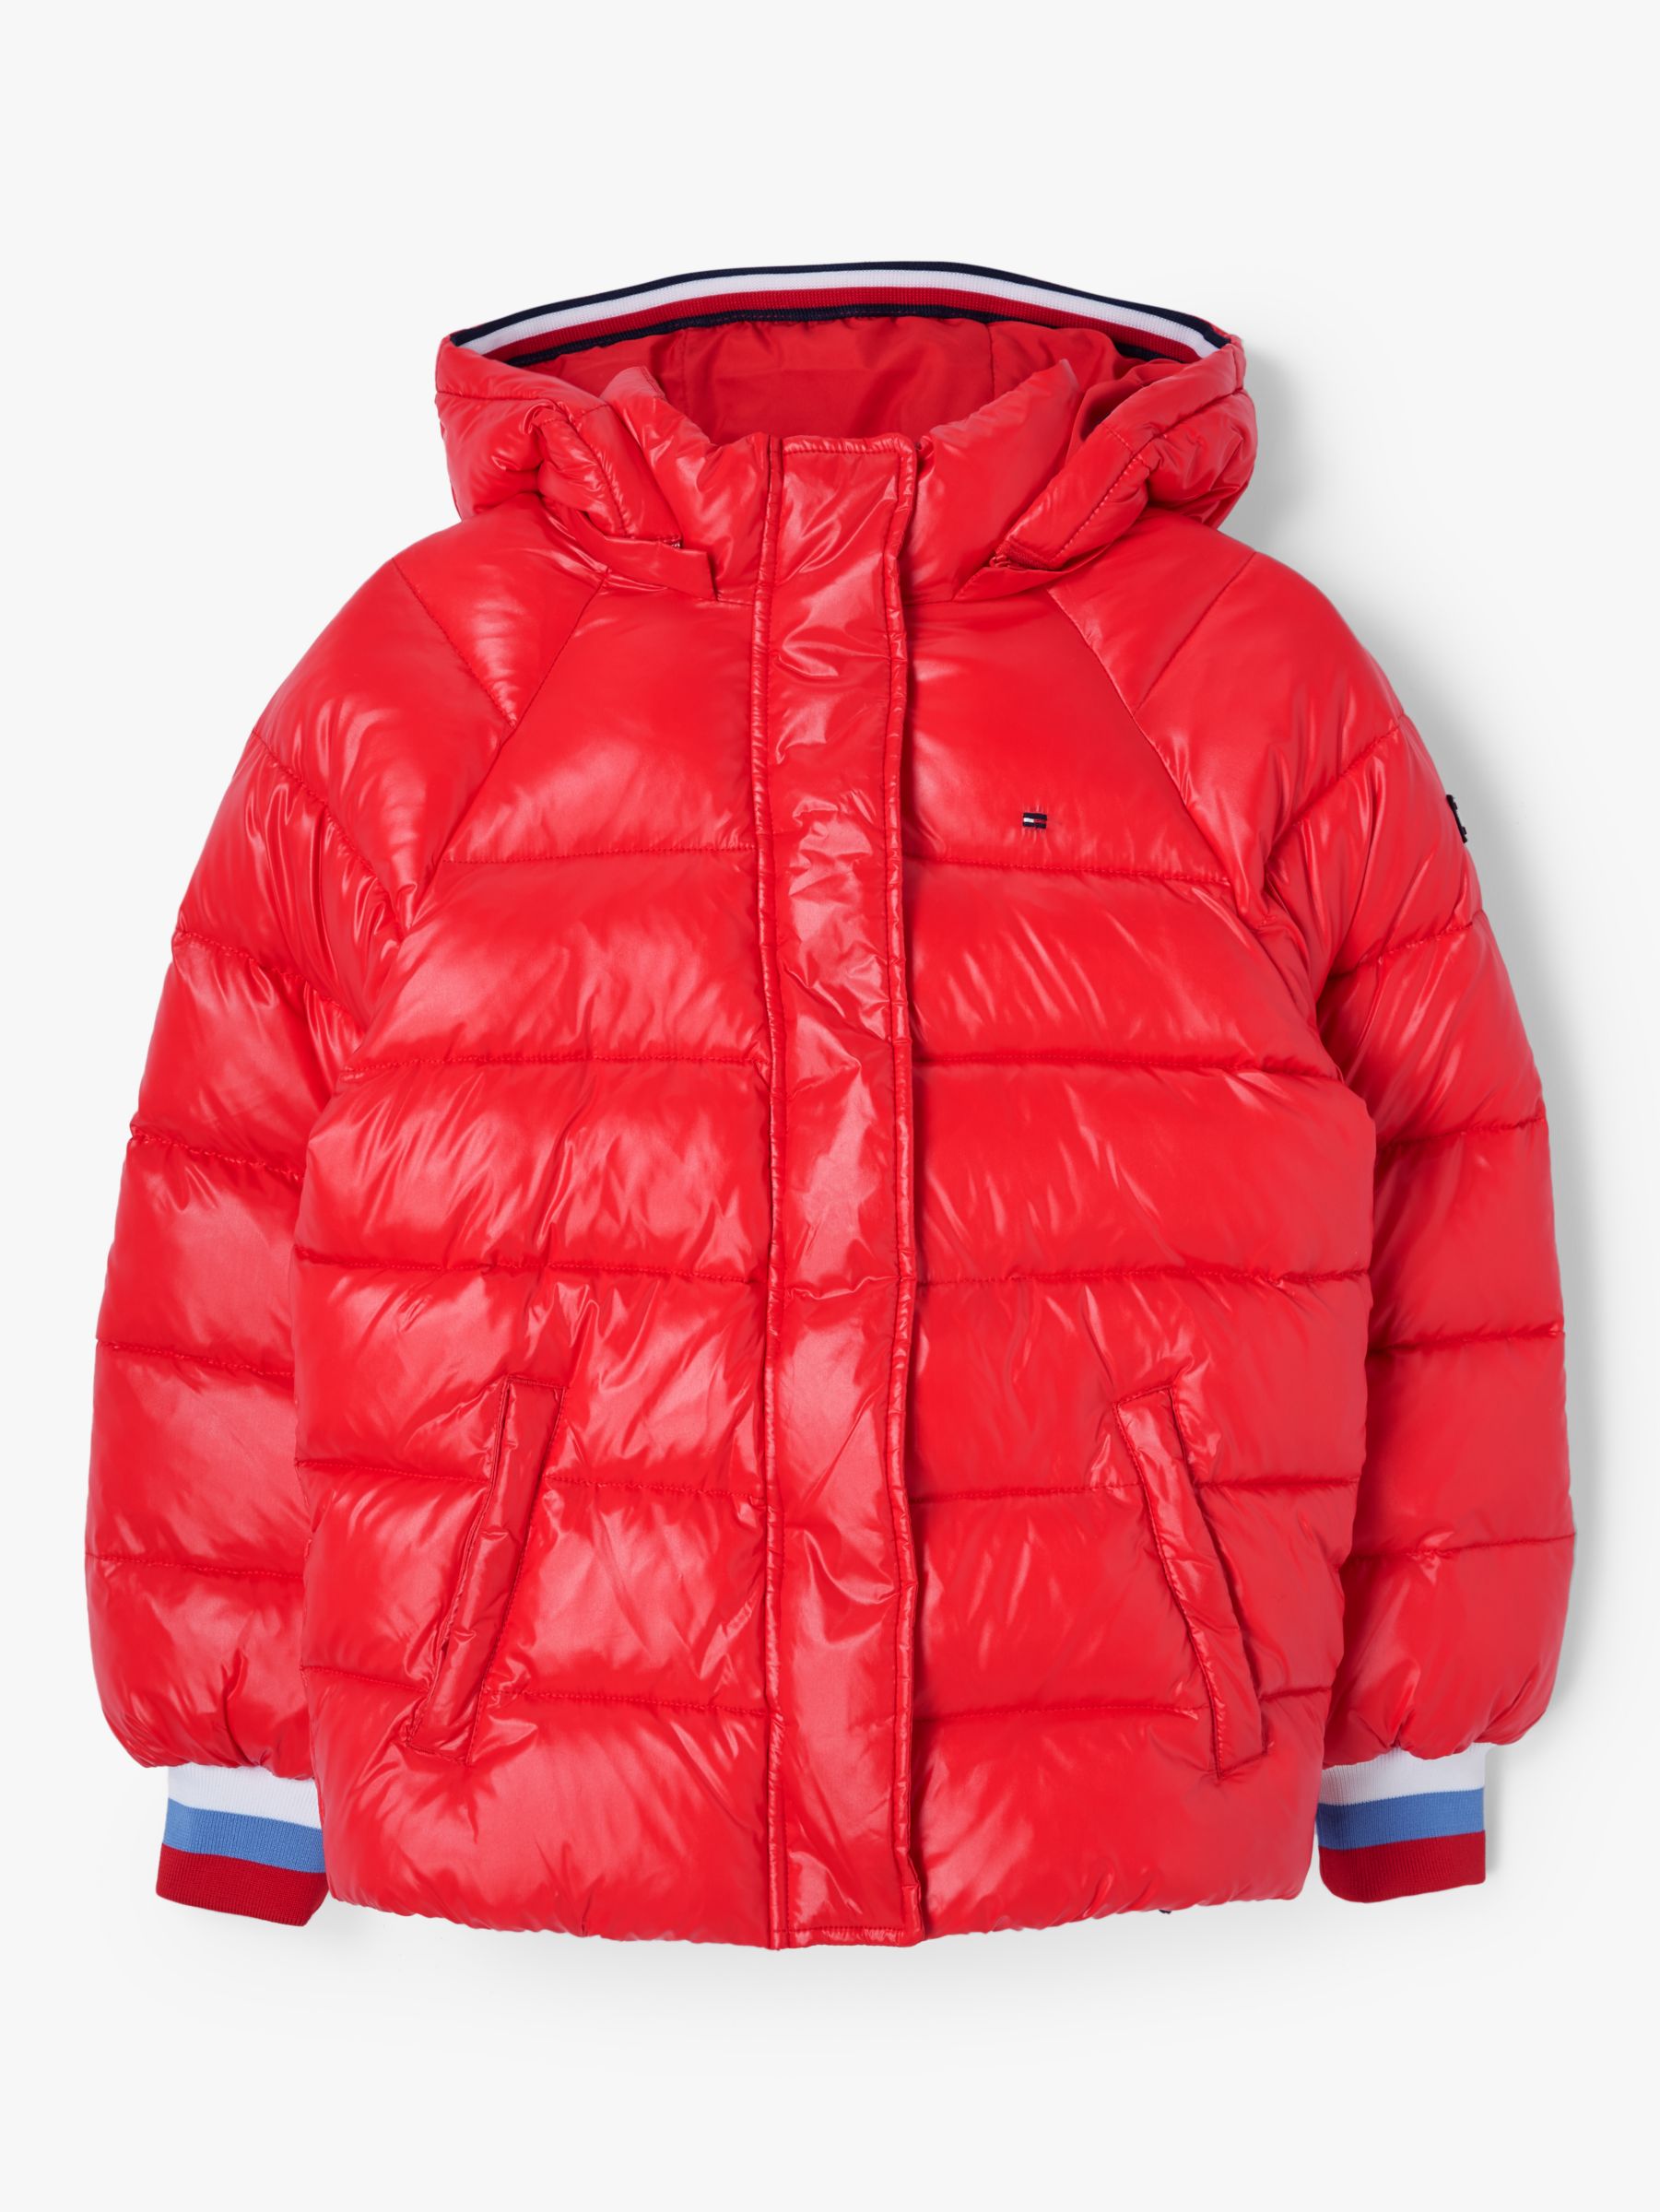 tommy hilfiger red puffer jacket